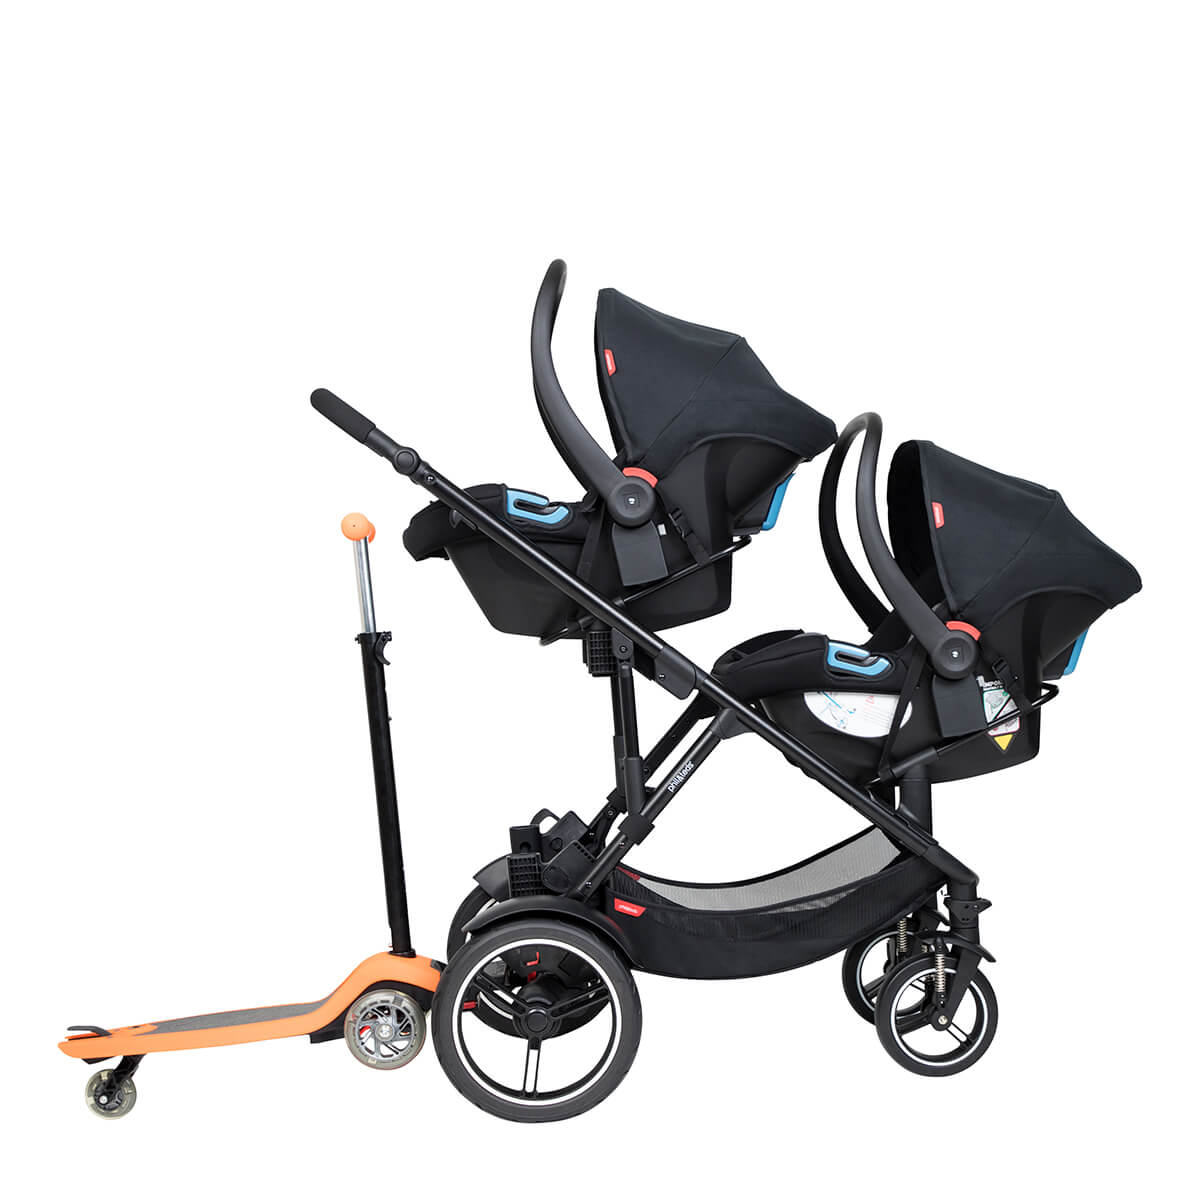 https://cdn.accentuate.io/7552750387370/19794908643498/philteds-voyager-buggy-with-double-travel-systems-and-freerider-stroller-board-in-the-rear-v1664412367787.jpg?1200x1200